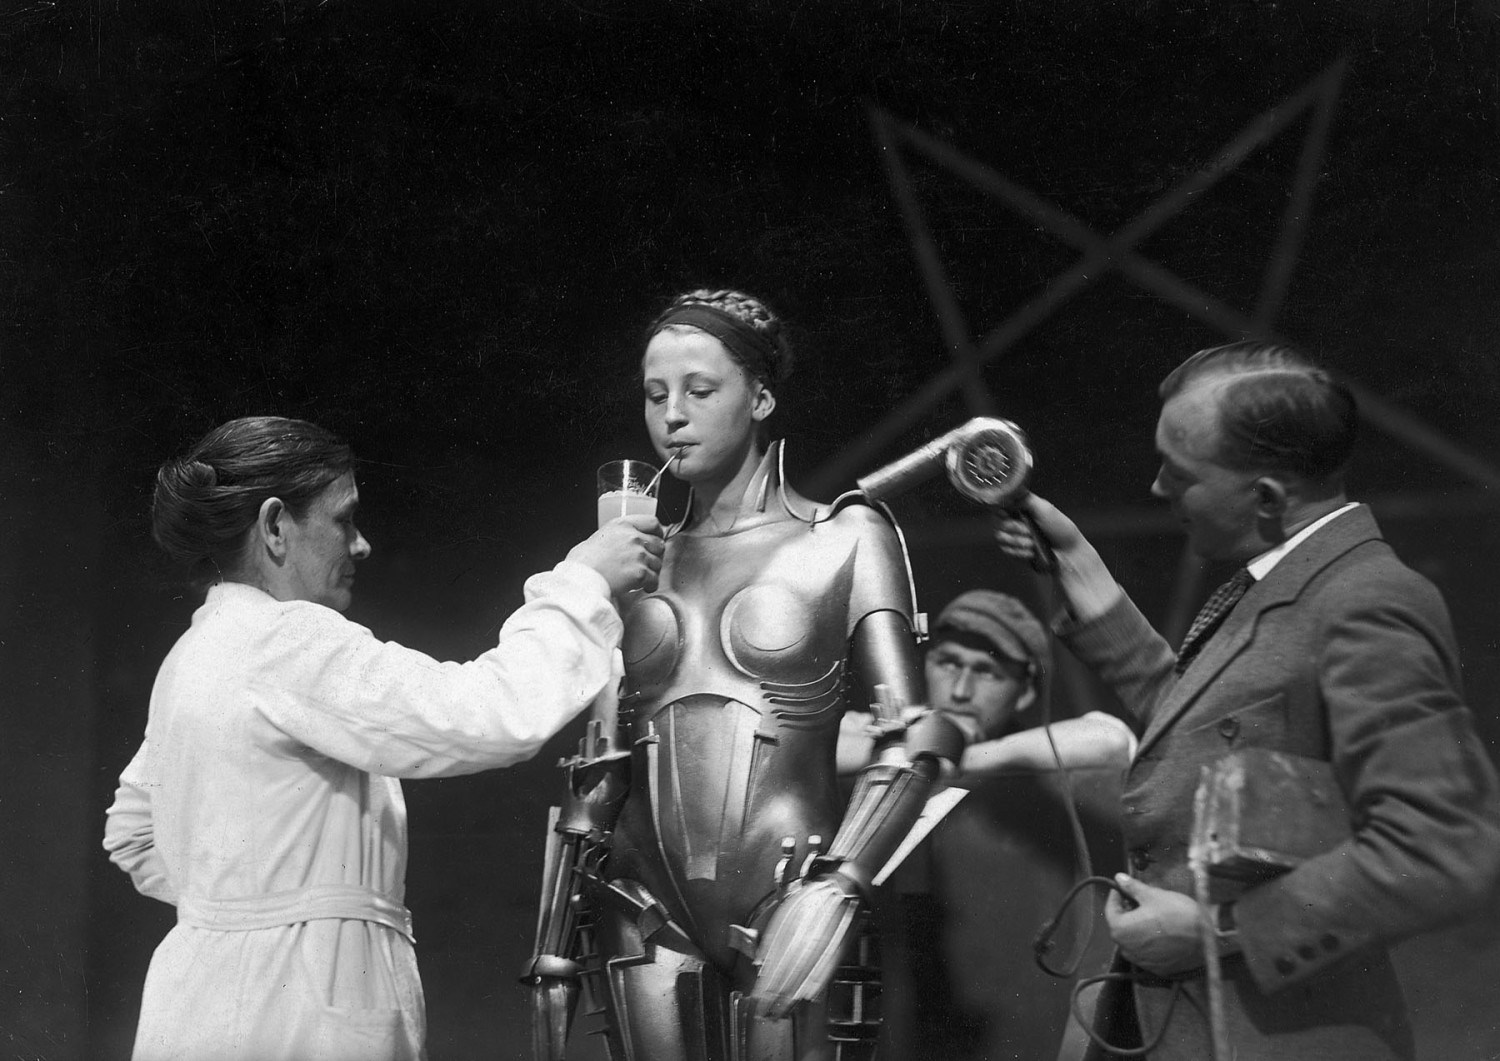 on-the-set-of-Fritz-Lang’s-Metropolis-—-the-actress-inside-the-Maria-robot-taking-a-breather